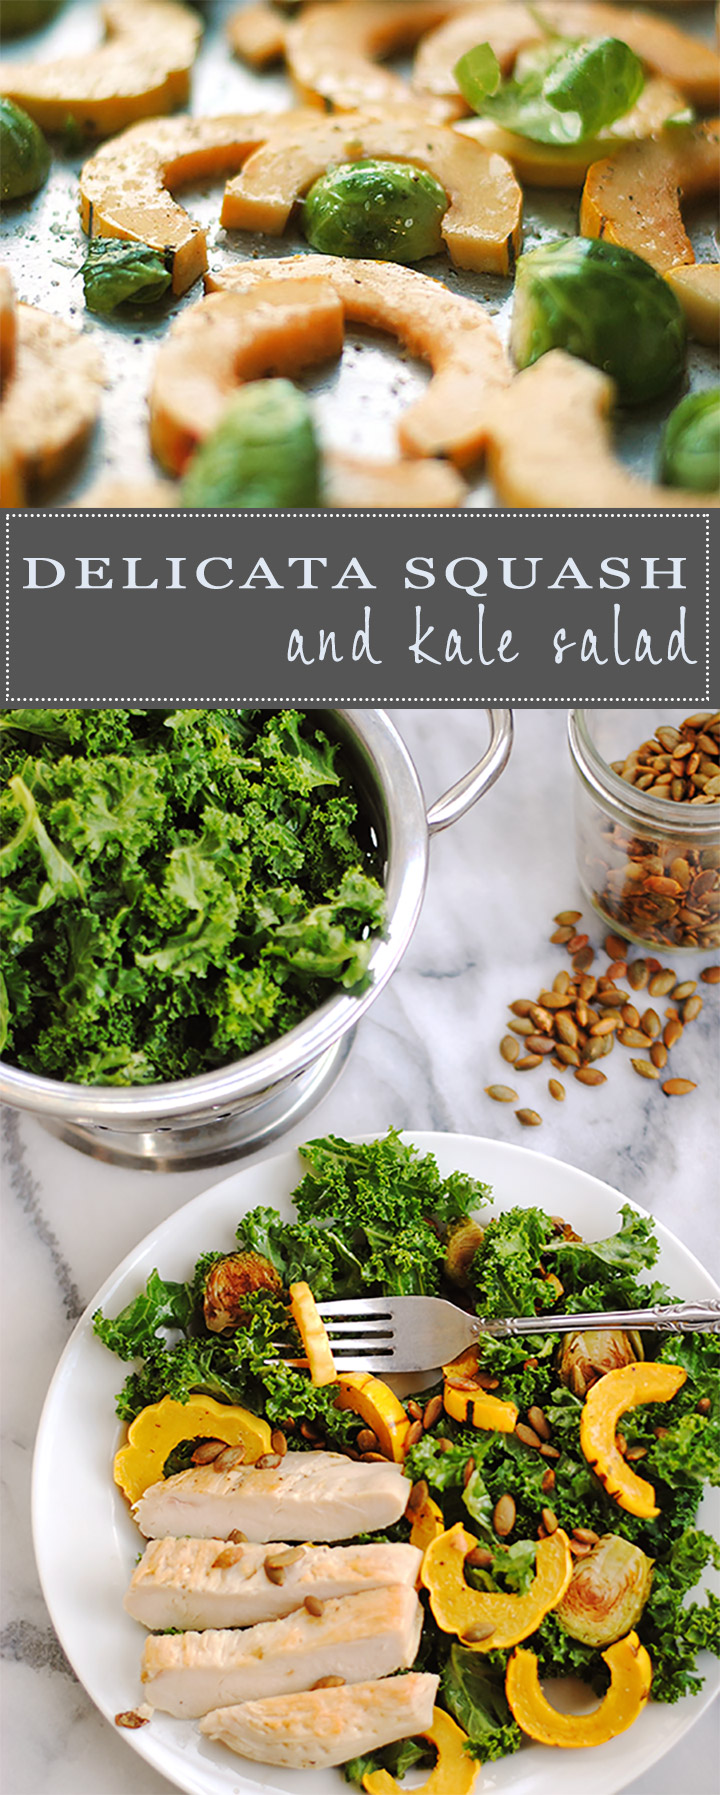 delicata squash and kale salad - you are going to want this delicious salad before your week is over. The roasted squash needs no peeling and the simple ingredients of kale, brussels, pumpkin seeds and mustard vinaigrette make it a recipe to keep. Change up different vegetables, add chicken if you want, or make this without chicken for the perfect Thanksgiving side dish! | shemadeitshemight.com